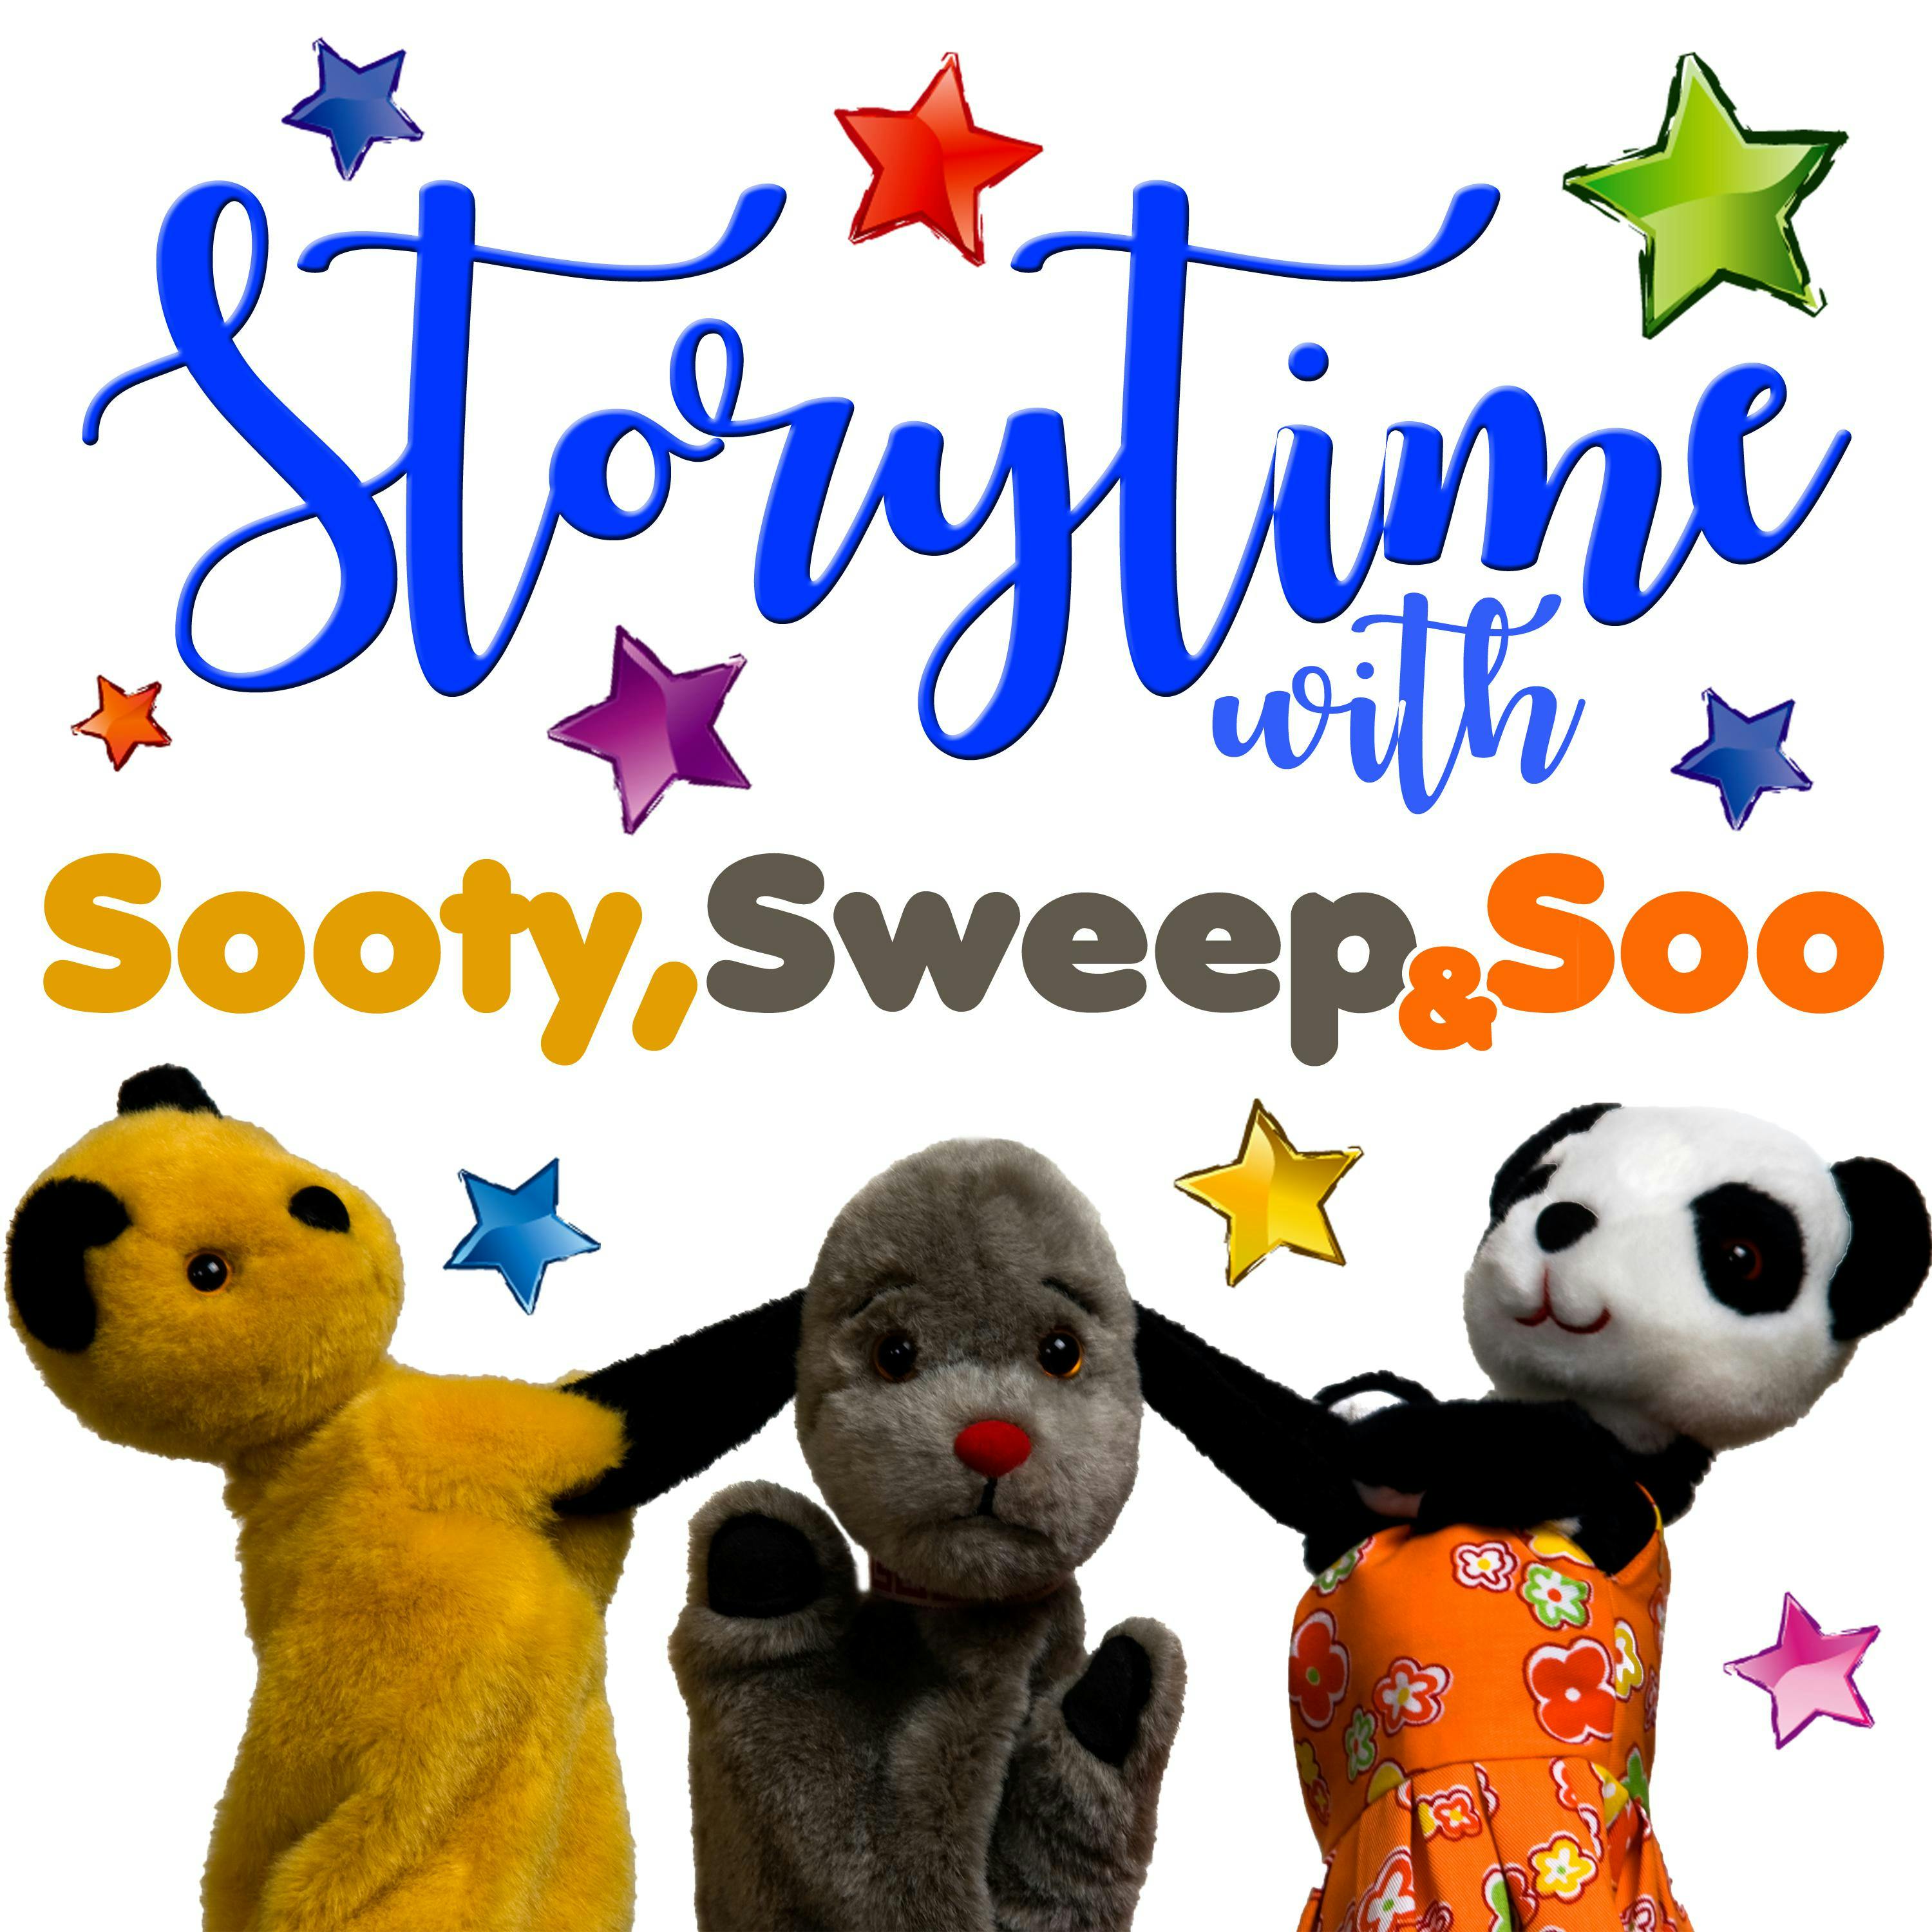 Sooty and Sweep - undefined